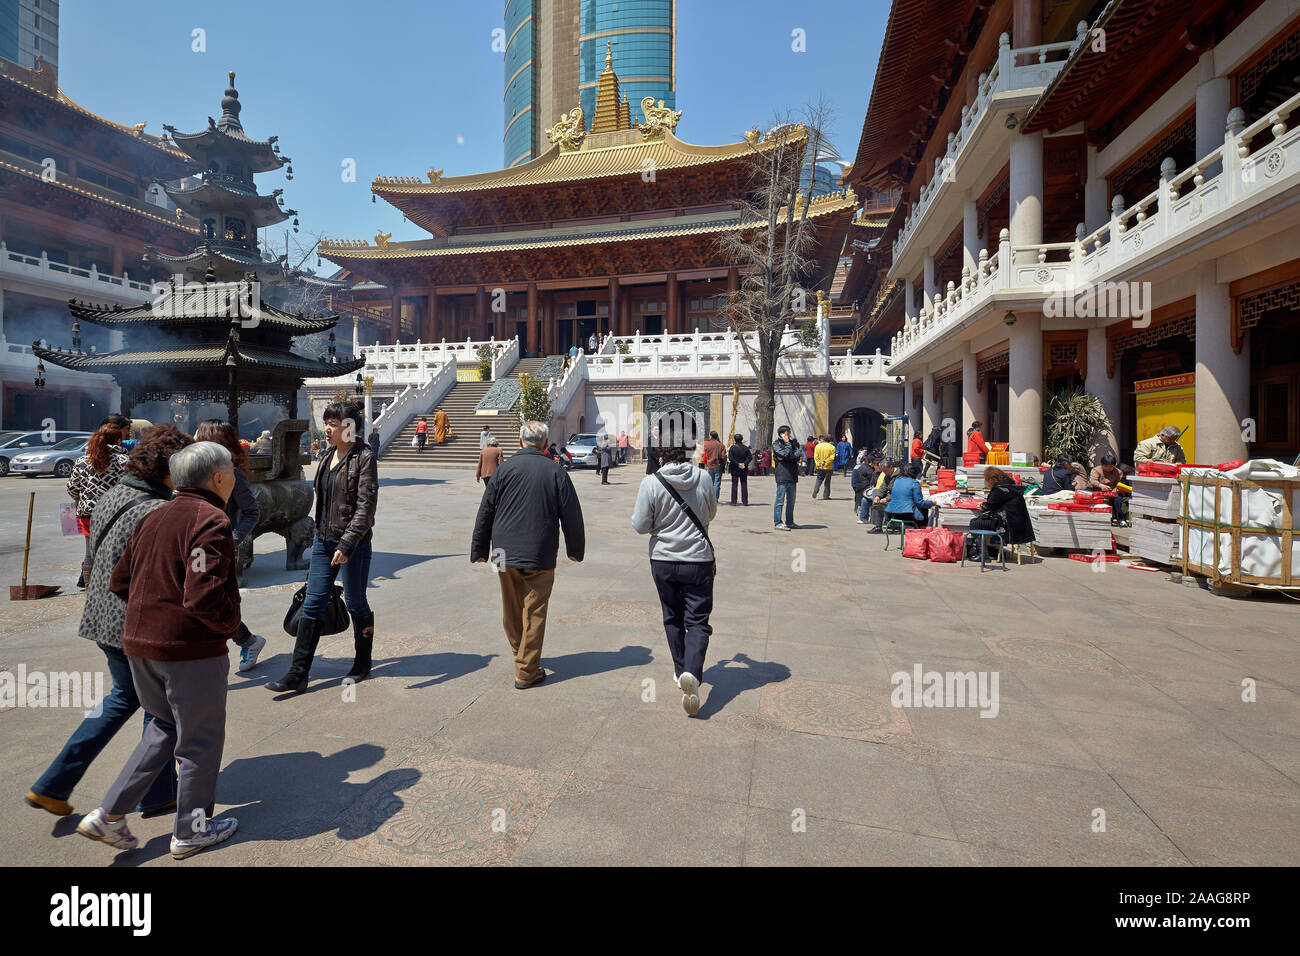 Jing'an Temple on West Nanjing Road in the Jing'an district of Shanghai, China. Stock Photo